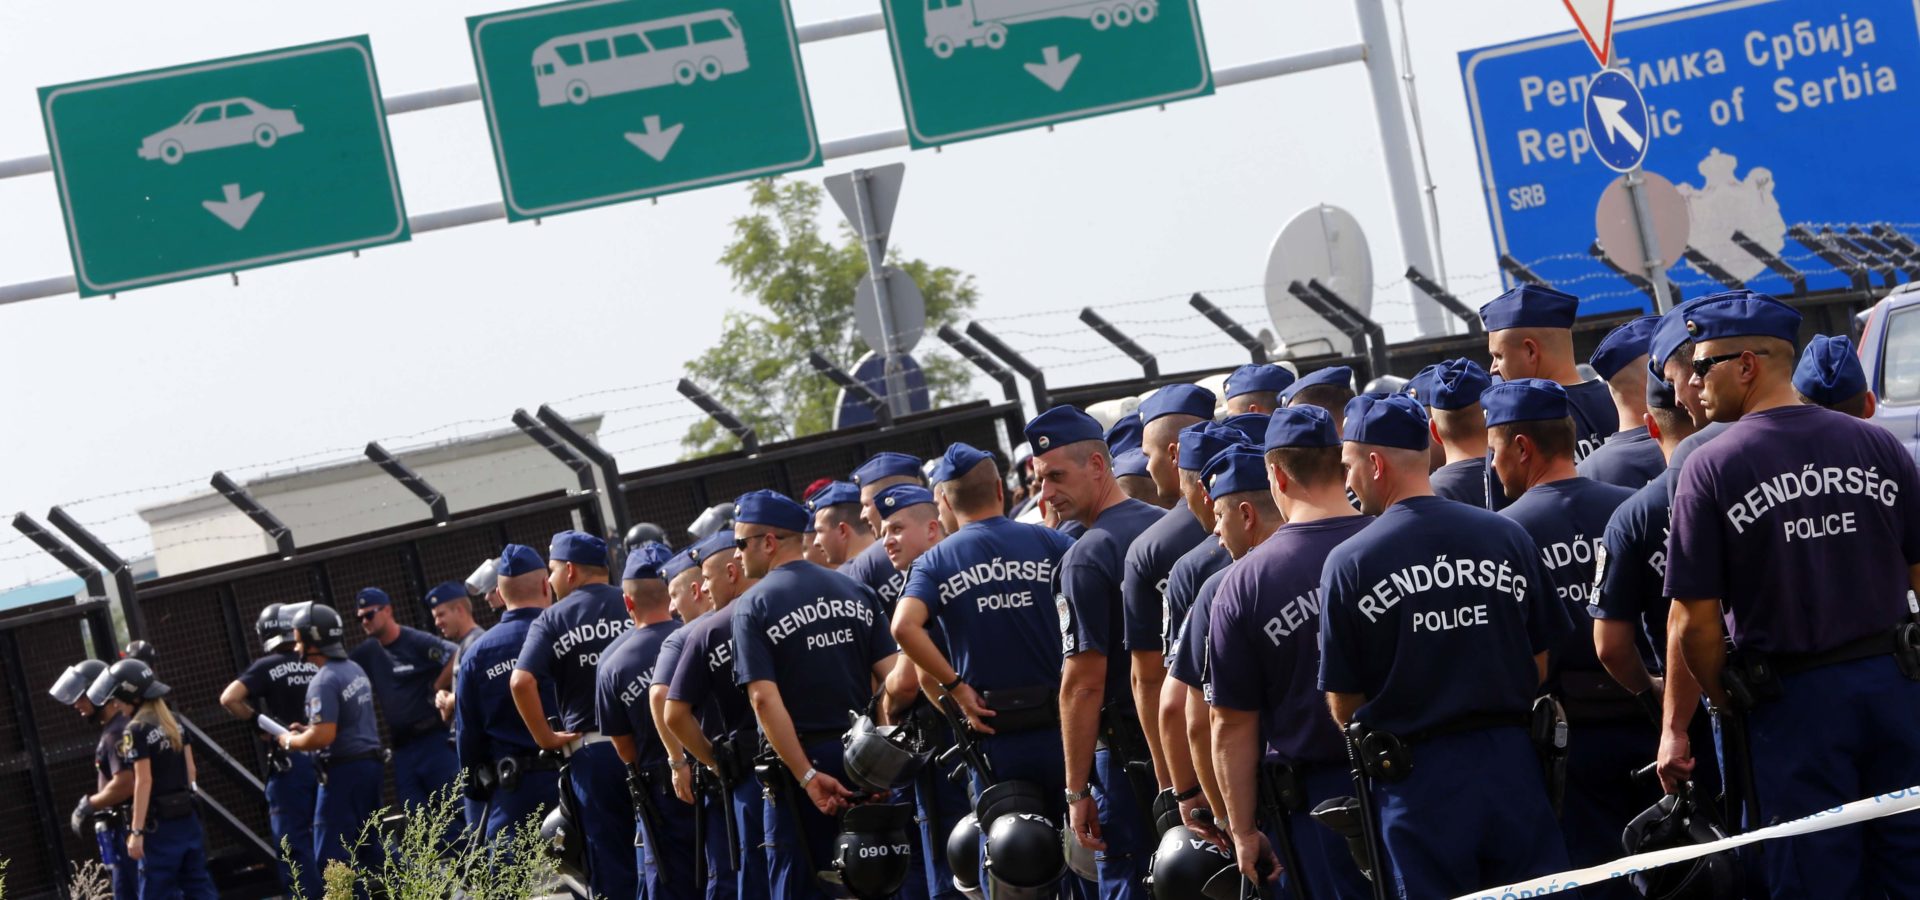 Hungarian police officers gather at main border exit between Serbia and Hungary near Roszke, southern Hungary, Tuesday, Sept. 15, 2015. Hungary are set to introduce much harsher border controls at midnight  laws that would send smugglers to prison and deport migrants who cut under Hungary's new razor-wire border fence. The country's leader was emphatically clear that they were designed to keep the migrants out. (AP Photo/Matthias Schrader)